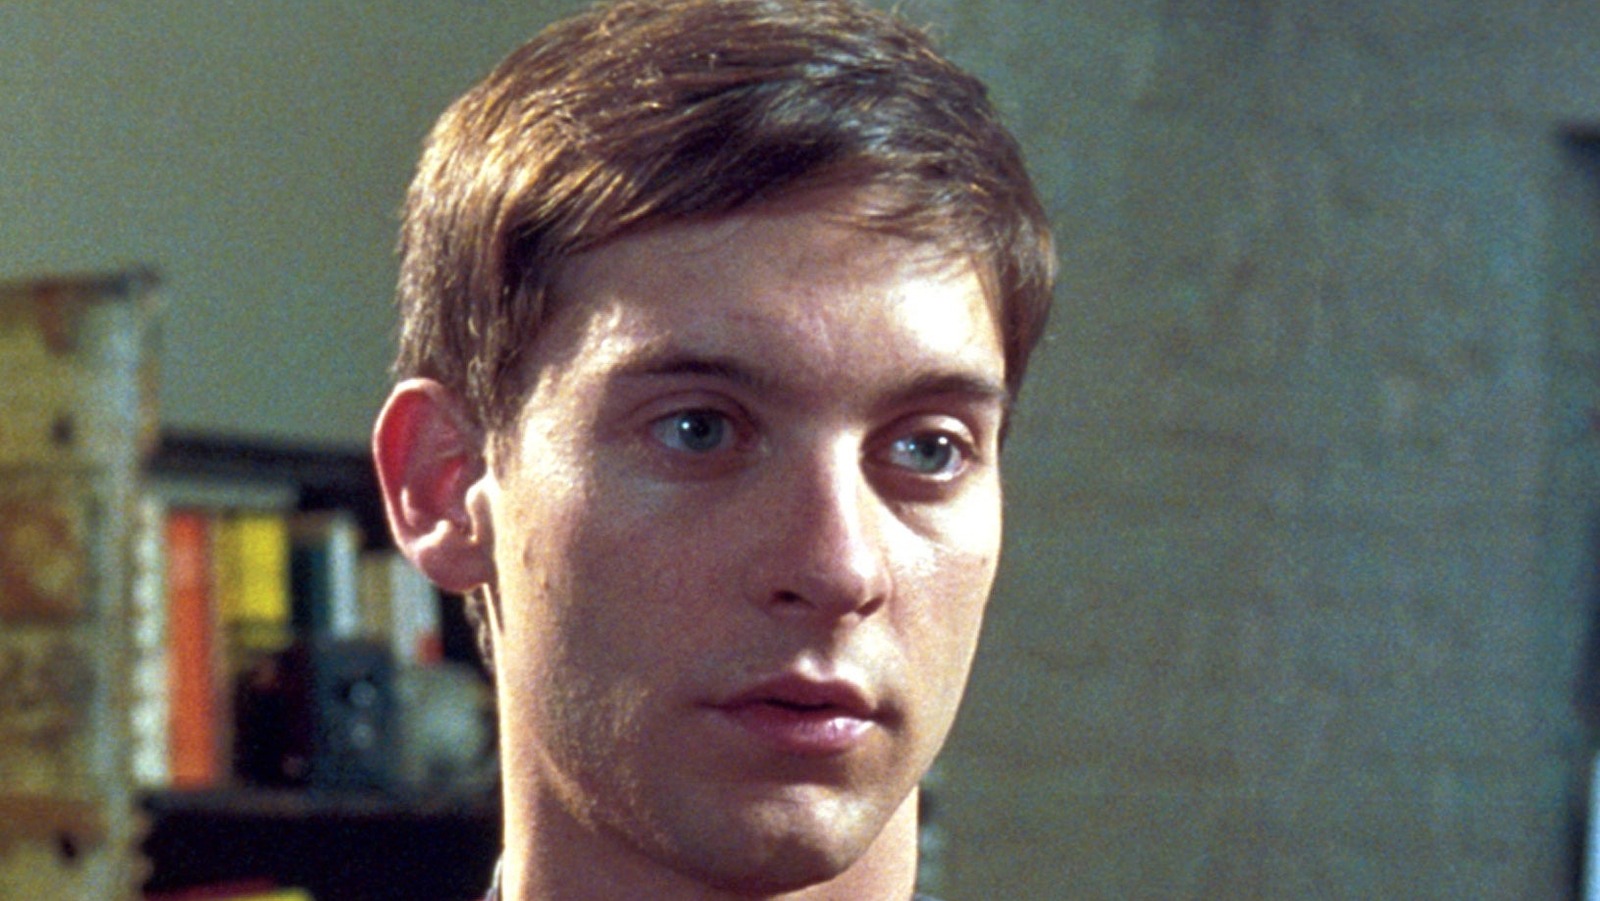 Every Tobey Maguire Movie Ranked From Worst To Best image